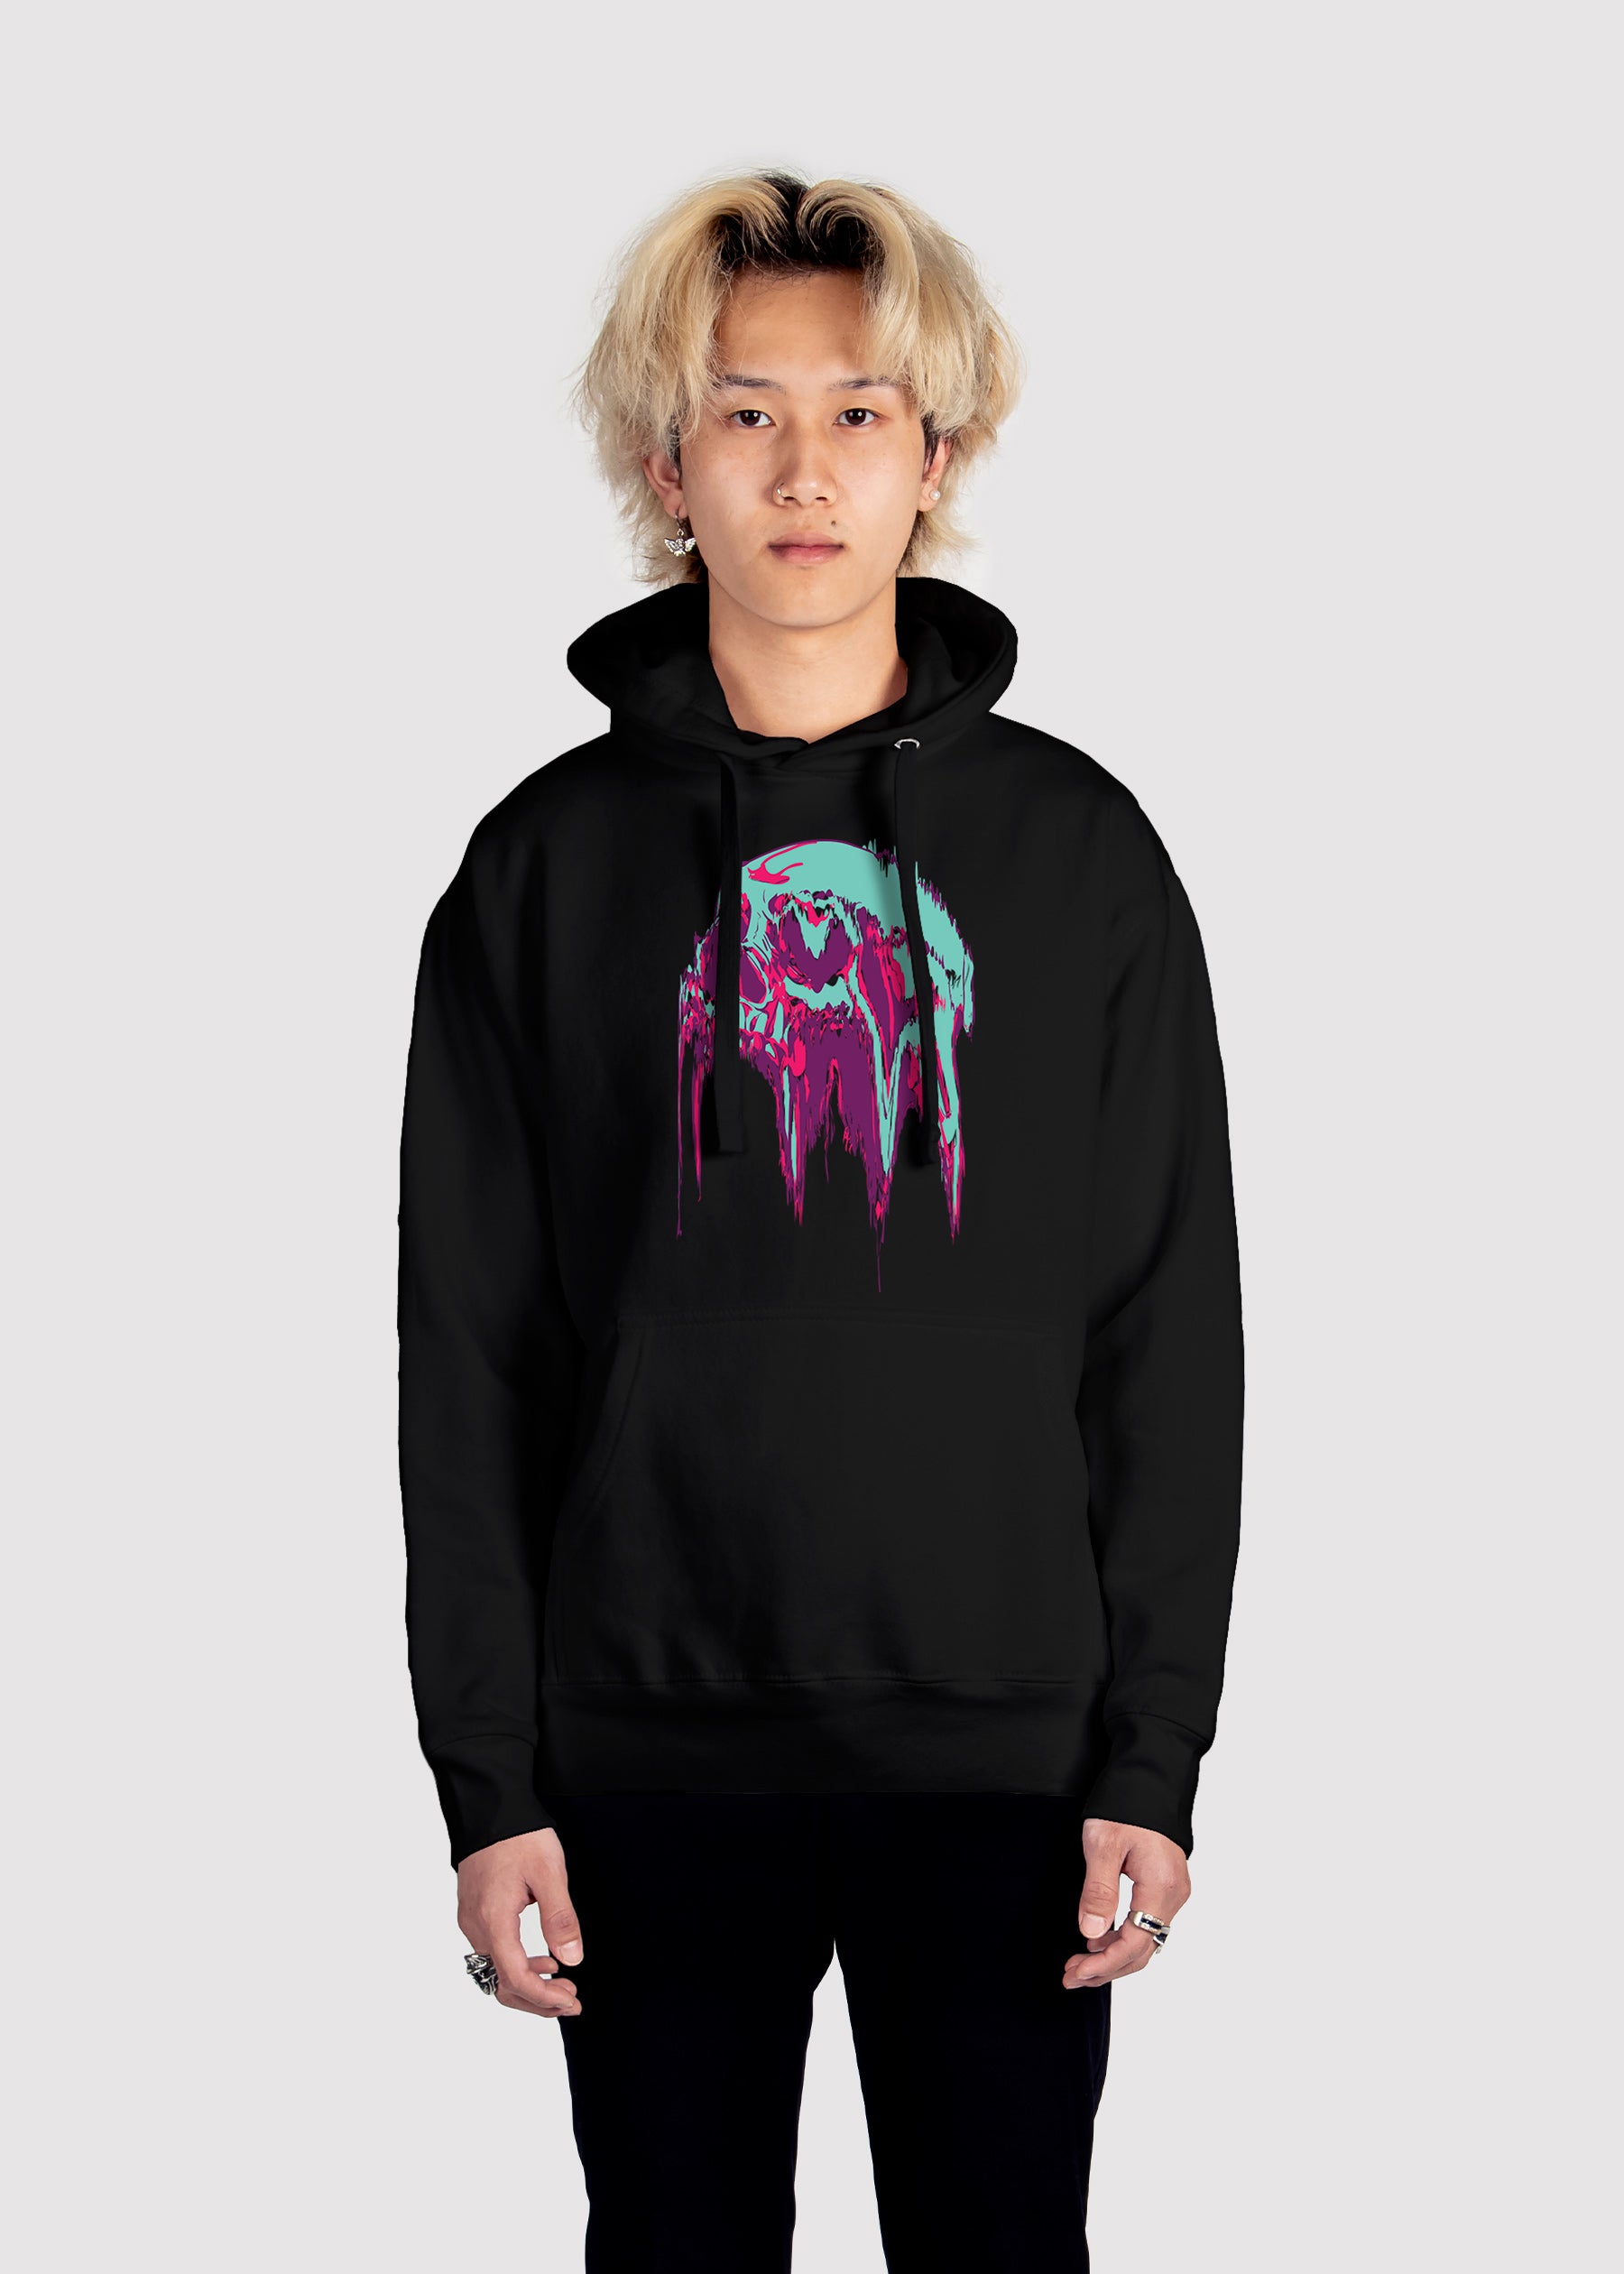 States Of Decay Hoodie